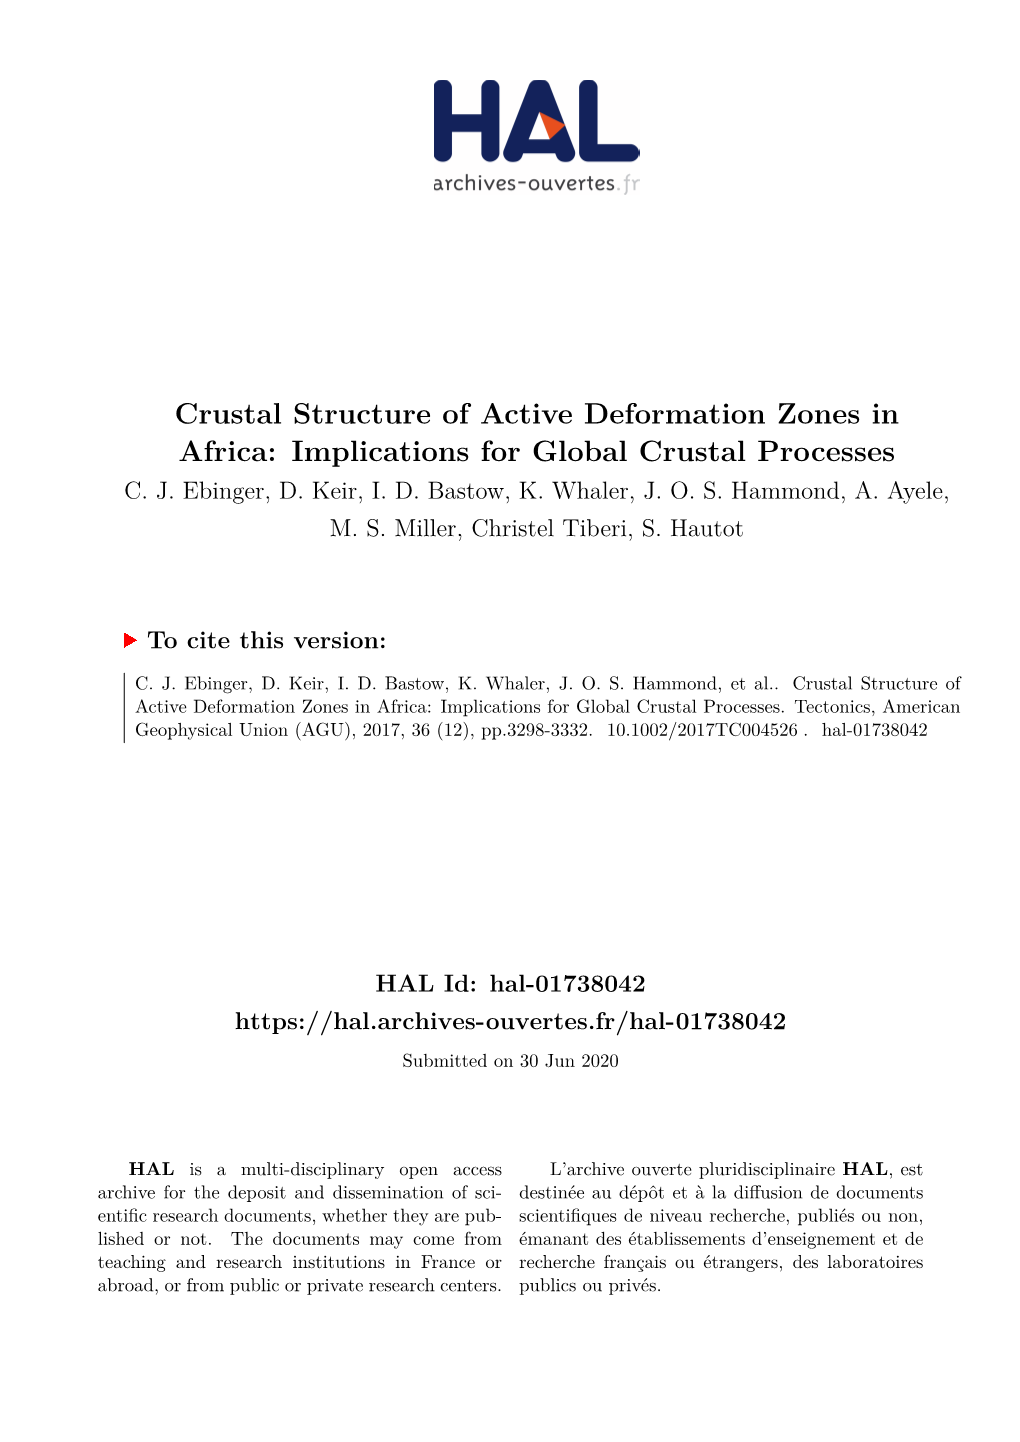 Crustal Structure of Active Deformation Zones in Africa: Implications for Global Crustal Processes C